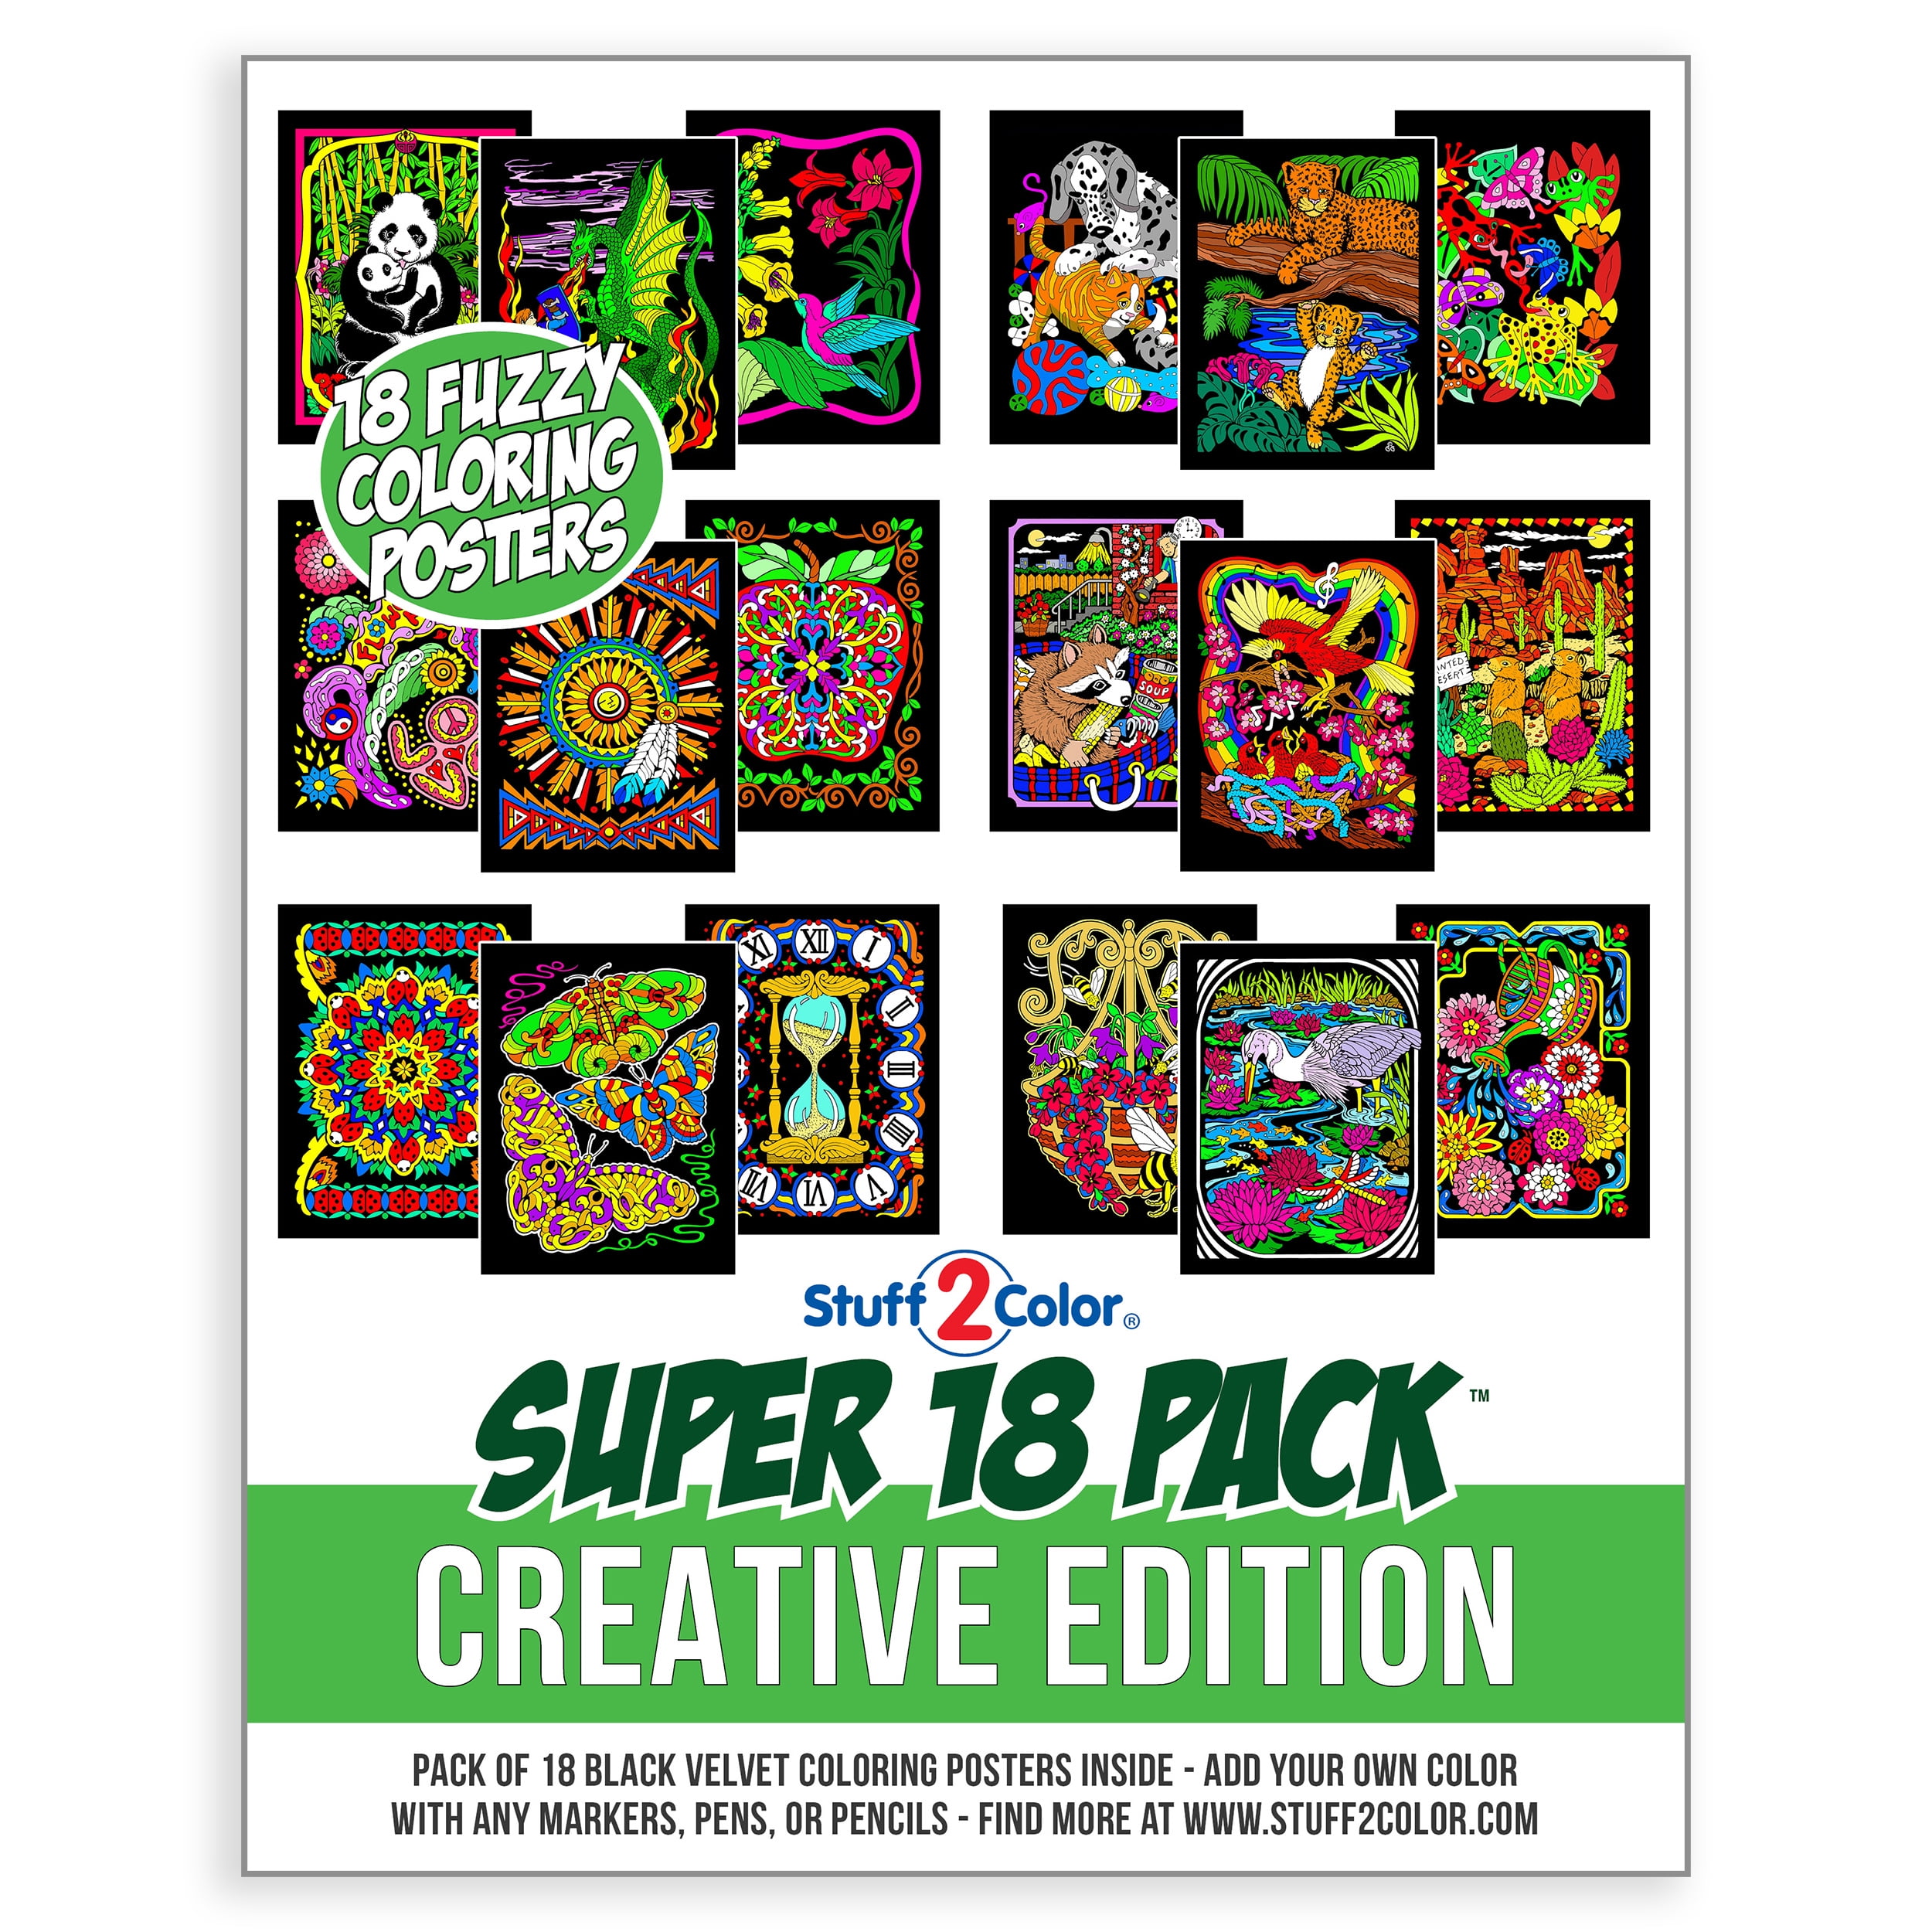 Puppies Velvet Poster & Markers Value Pack, 4 Poster Set